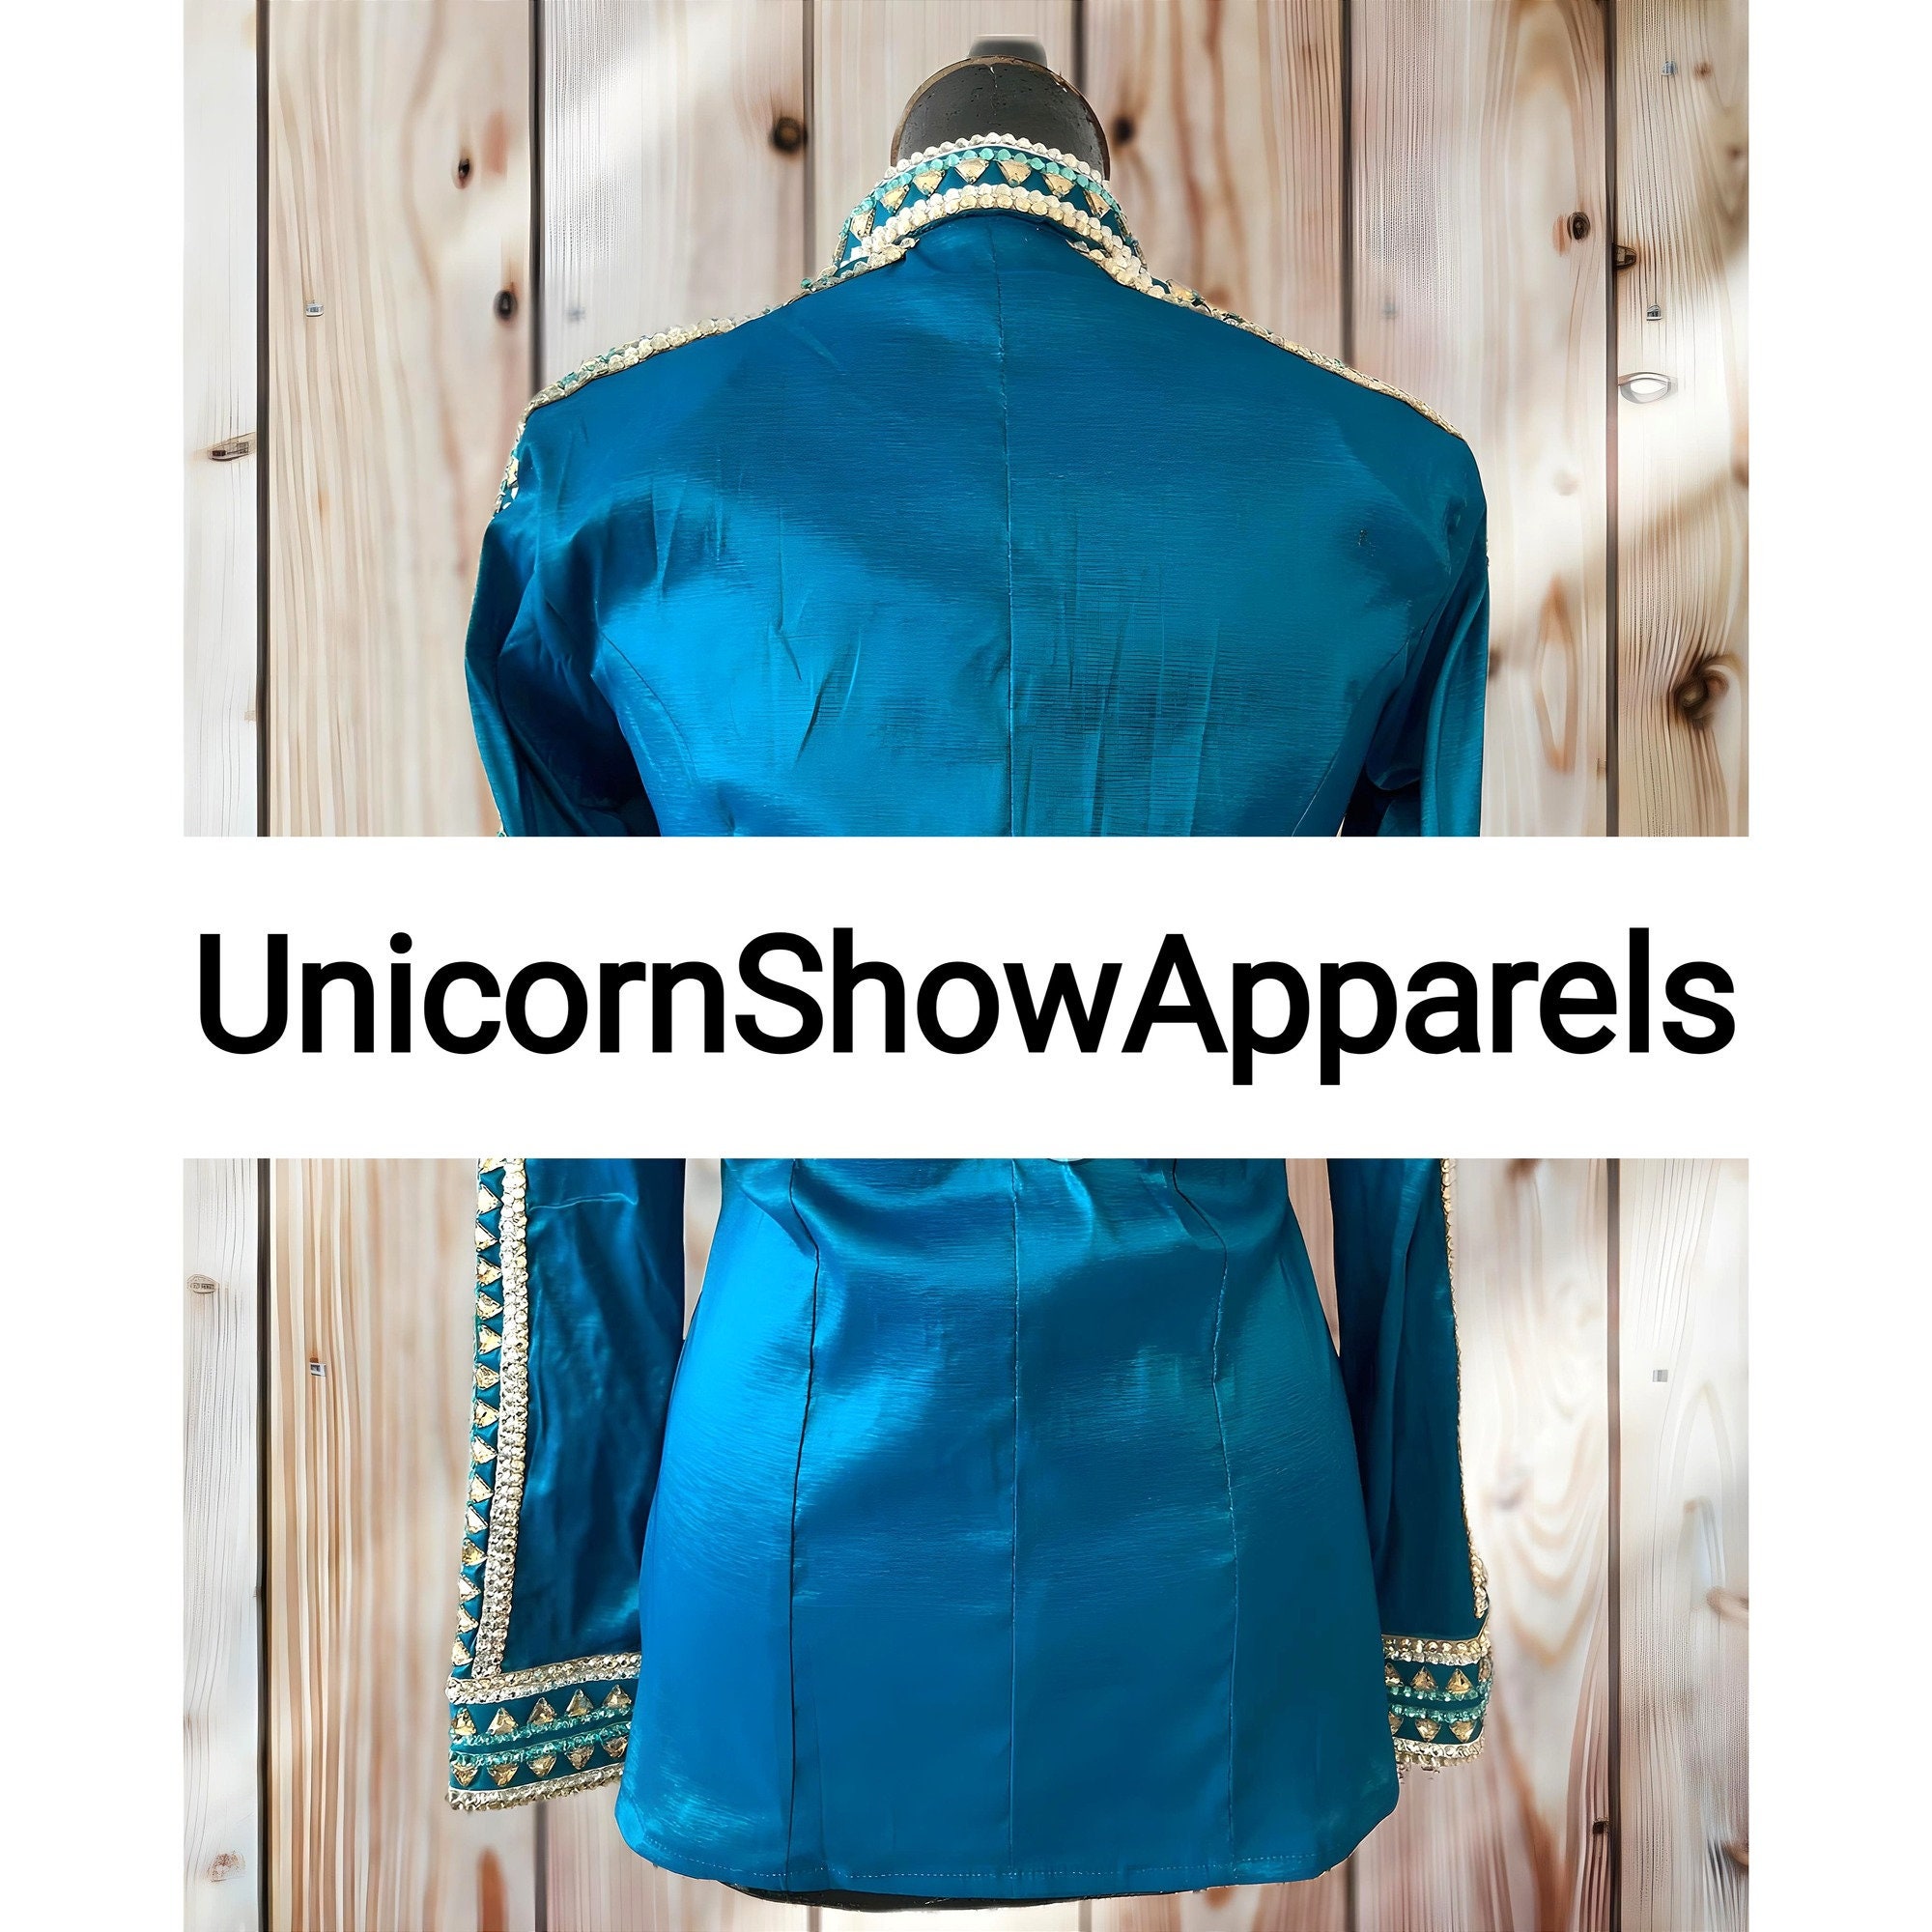 Teal and Gold Show Shirt and Pad Set Western Show Shirt Western Saddle ...